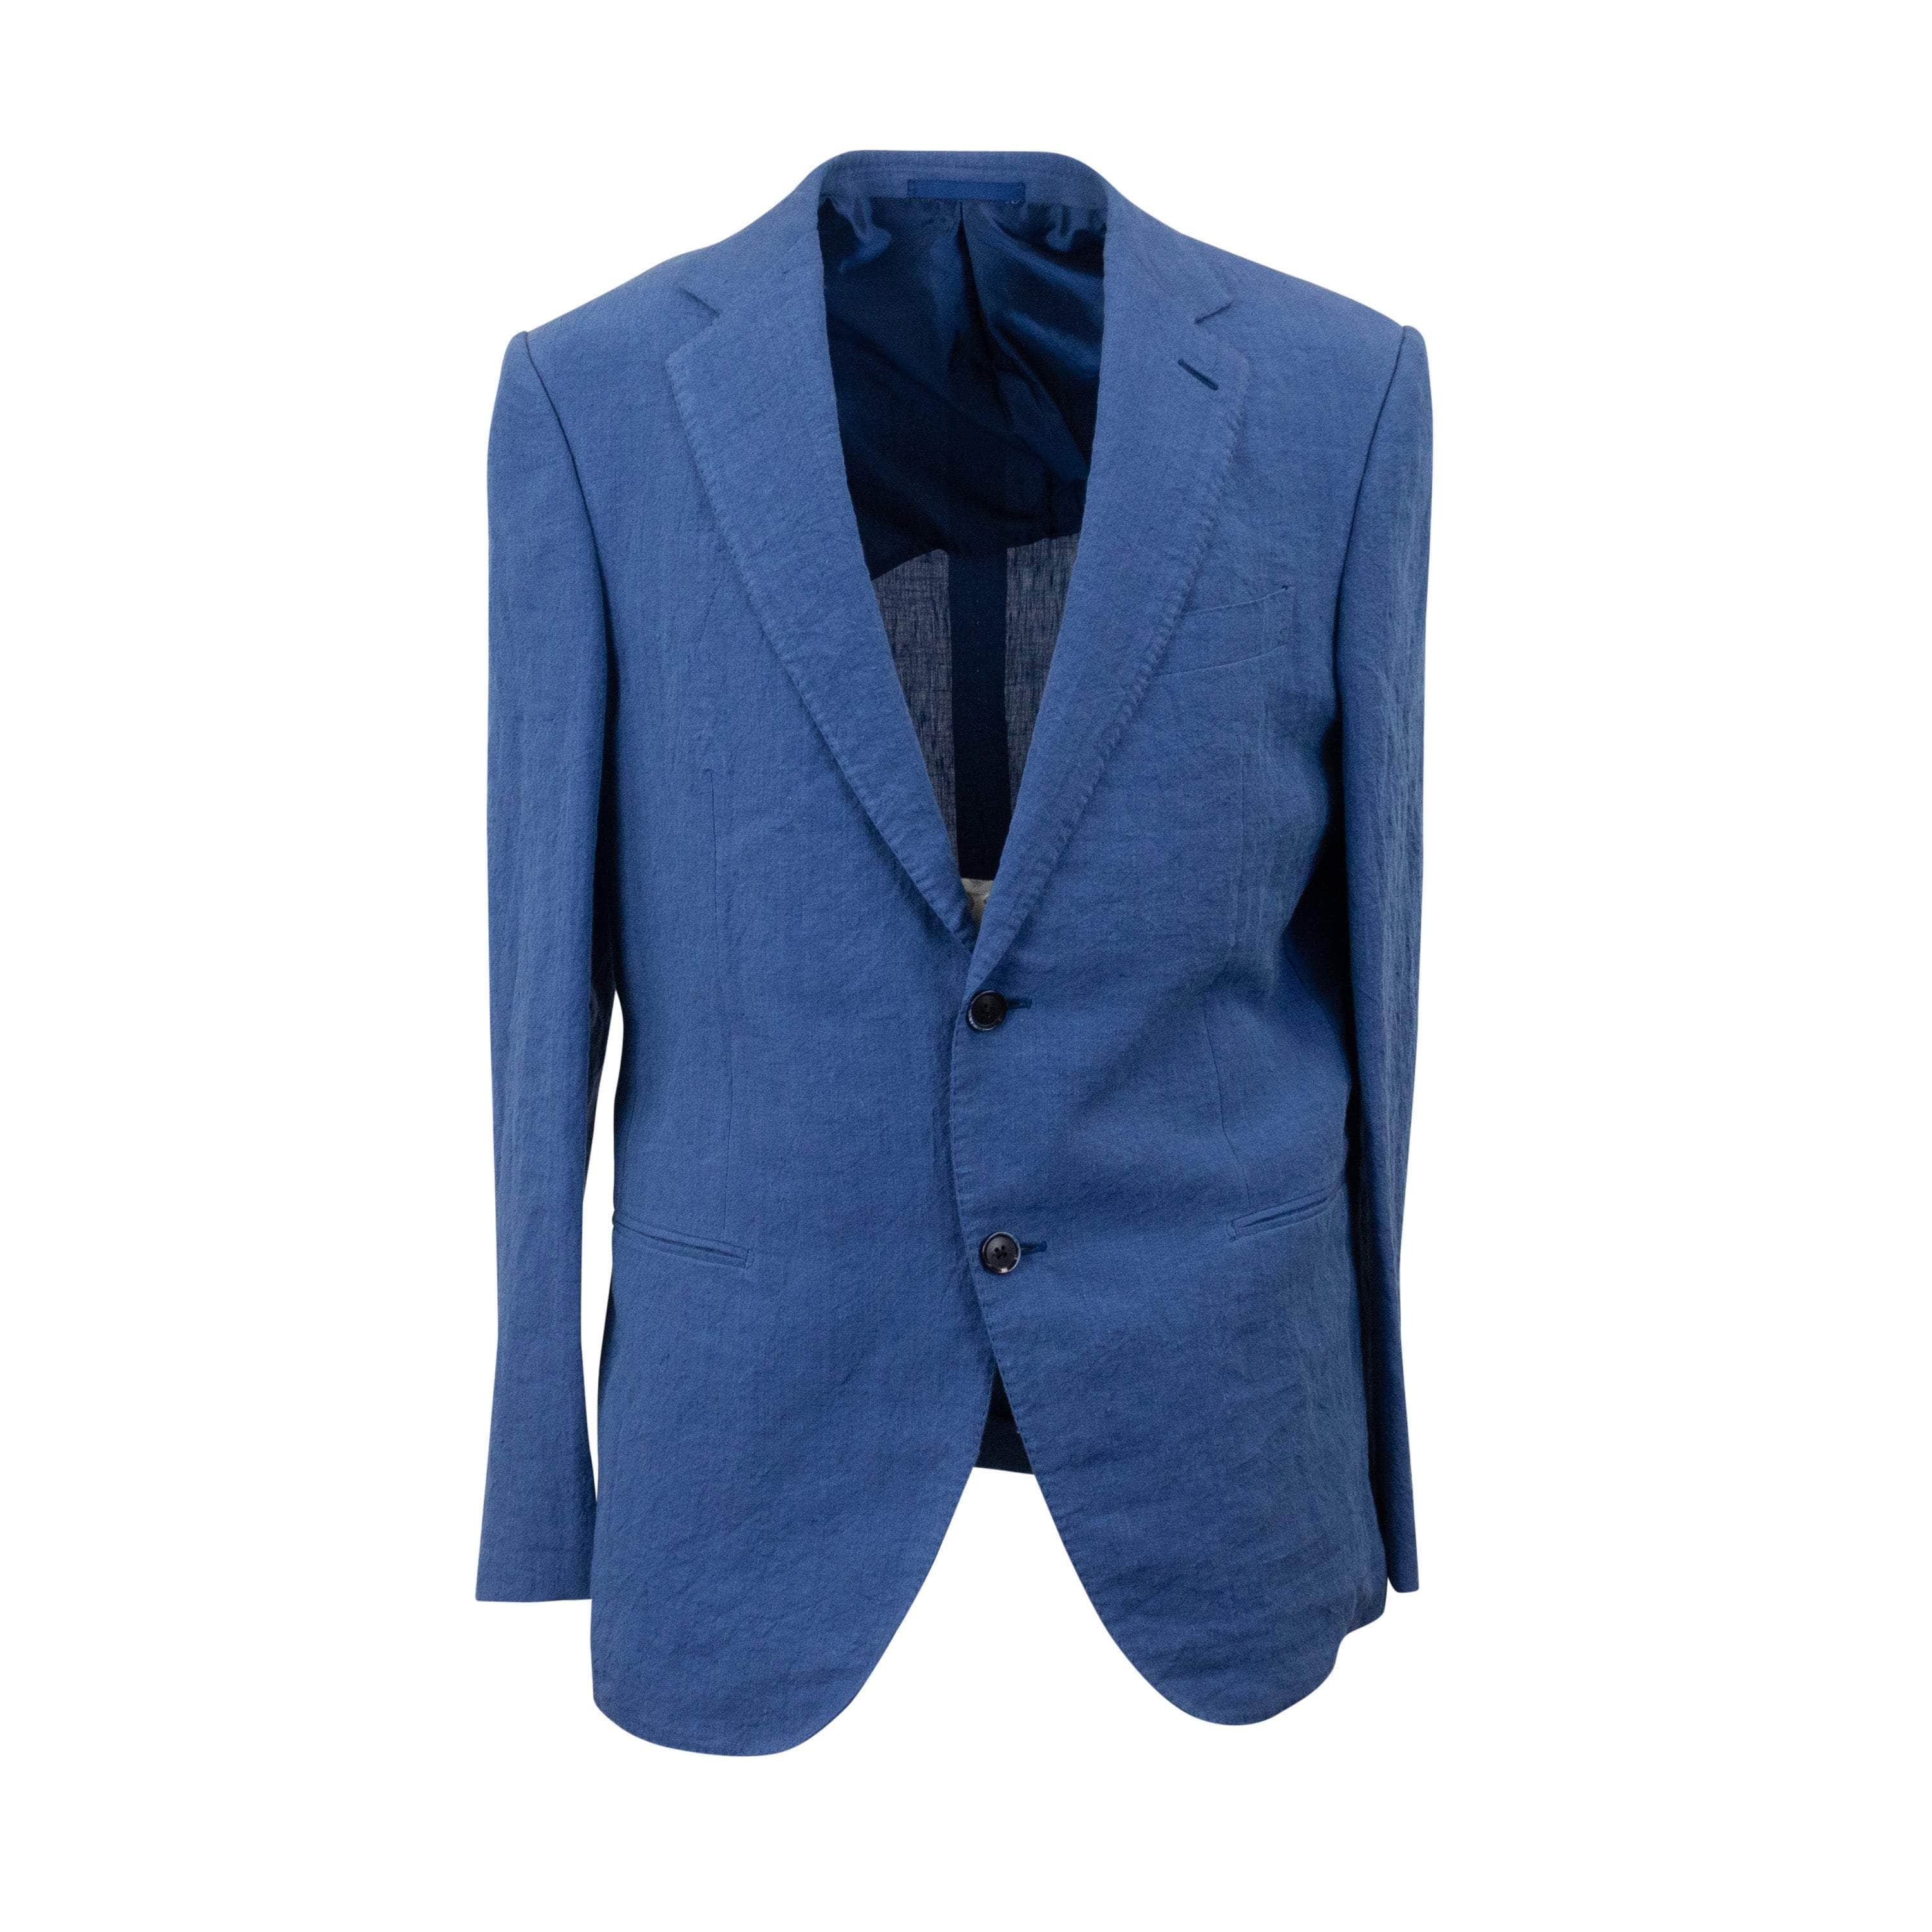 Caruso 500-750, caruso, channelenable-all, chicmi, couponcollection, main-clothing, shop375, size-50, Stadium Goods, stadiumgoods 50 Dodger Blue Linen Single Breasted Suit CRS-XTPS-0132/50 CRS-XTPS-0132/50